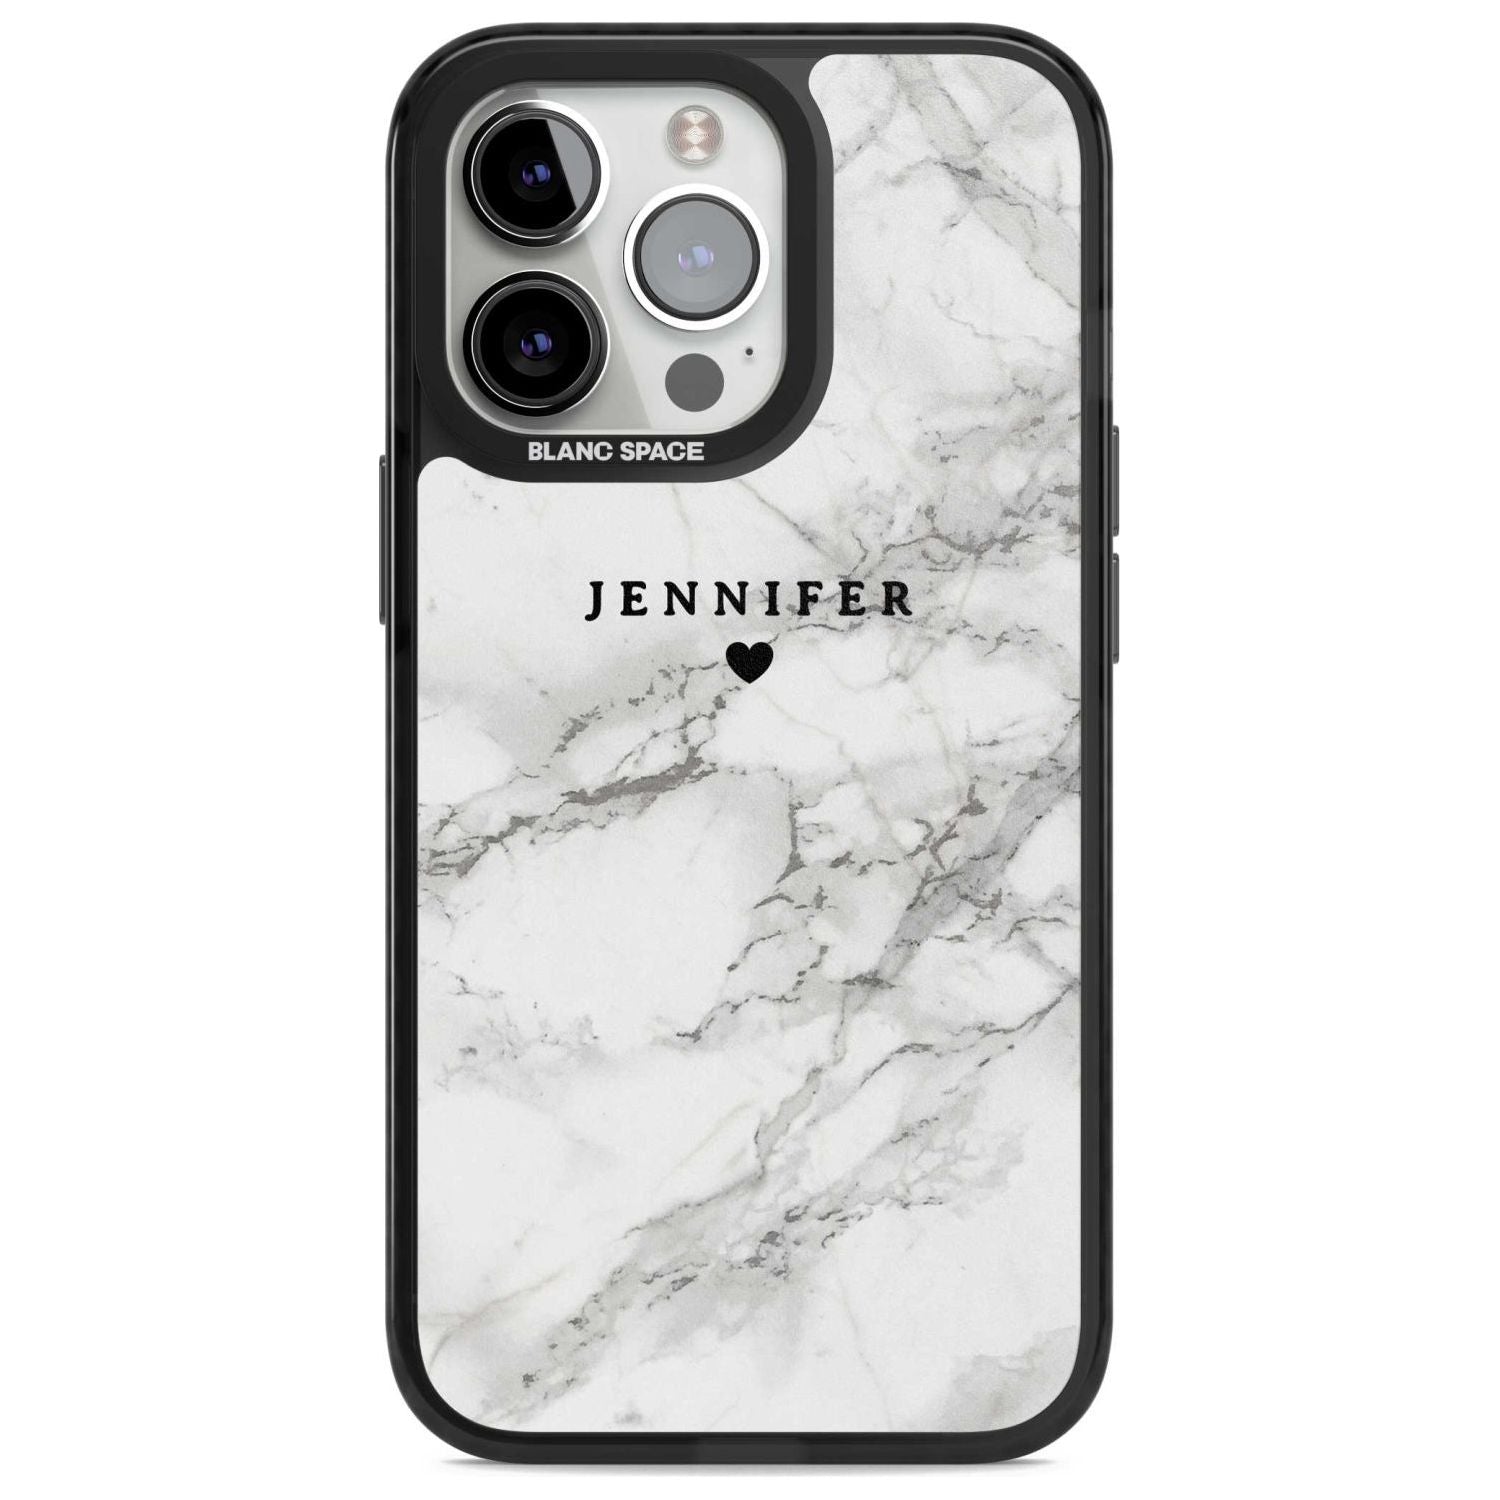 Personalised Classic Grey Marble Custom Phone Case iPhone 15 Pro Max / Magsafe Black Impact Case,iPhone 15 Pro / Magsafe Black Impact Case,iPhone 14 Pro Max / Magsafe Black Impact Case,iPhone 14 Pro / Magsafe Black Impact Case,iPhone 13 Pro / Magsafe Black Impact Case Blanc Space